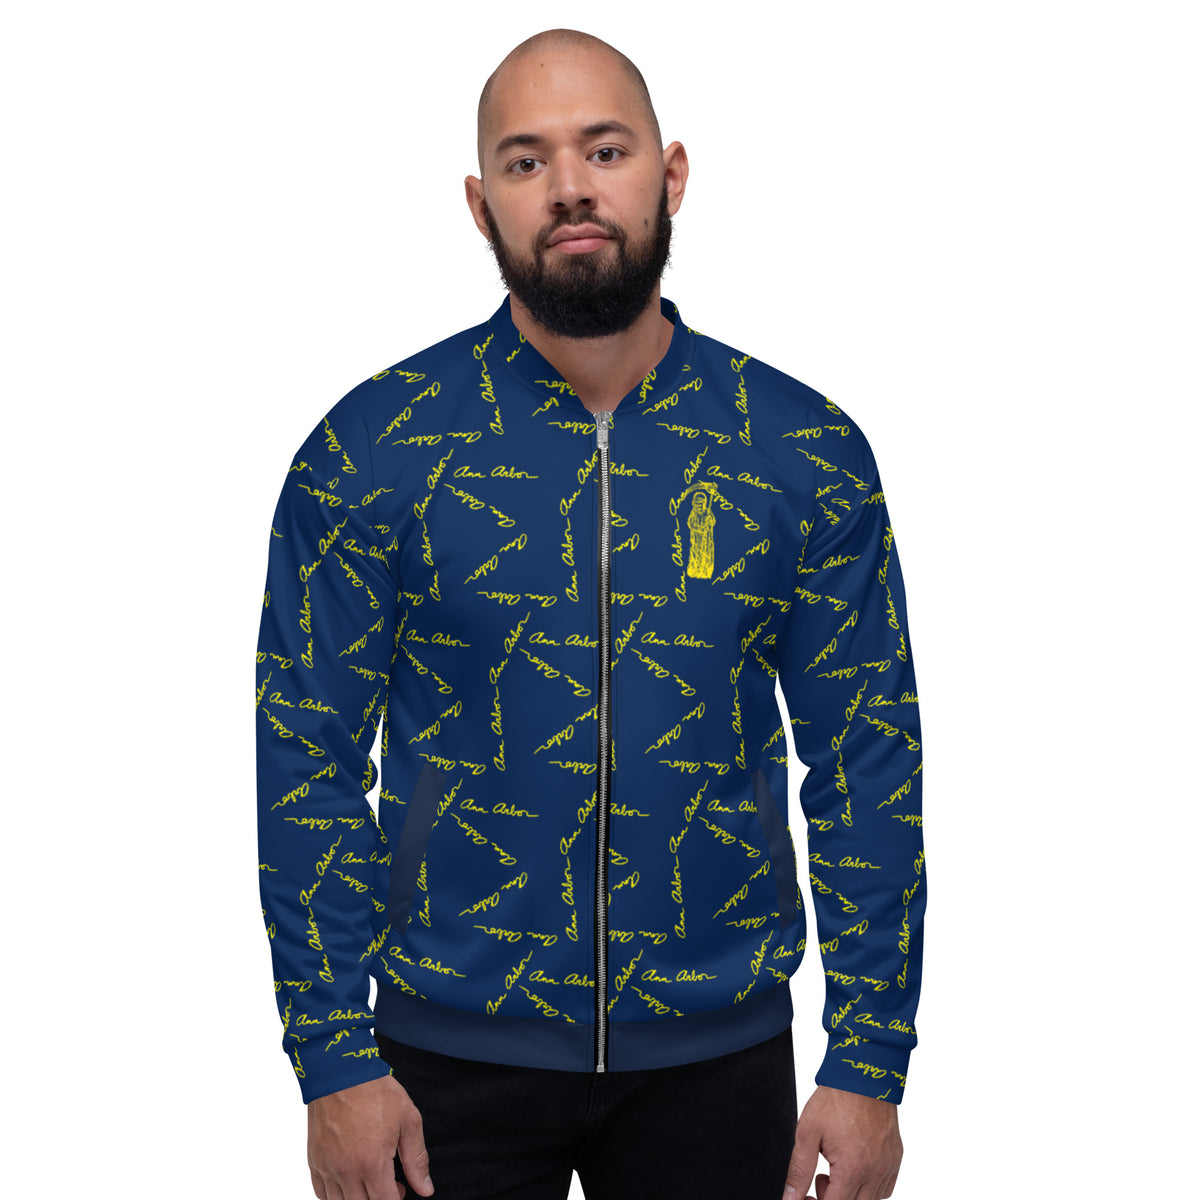 Ann Arbor Grim Reaper Unisex Bomber Jacket – Dirtbags and Champagne